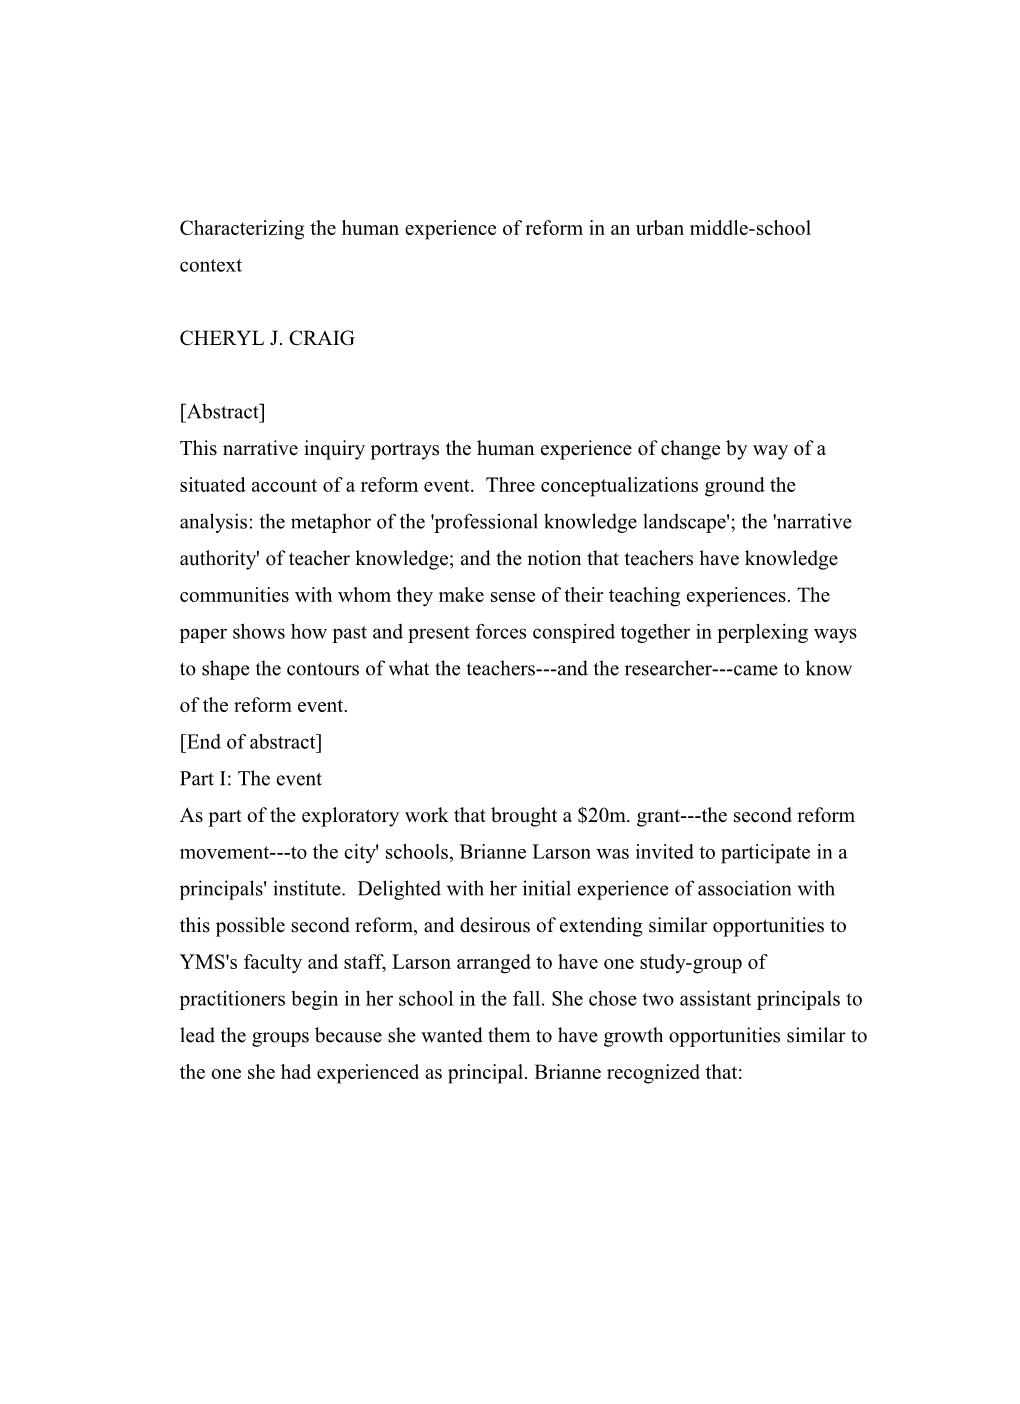 Characterizing the Human Experience of Reform in an Urban Middle-School Context